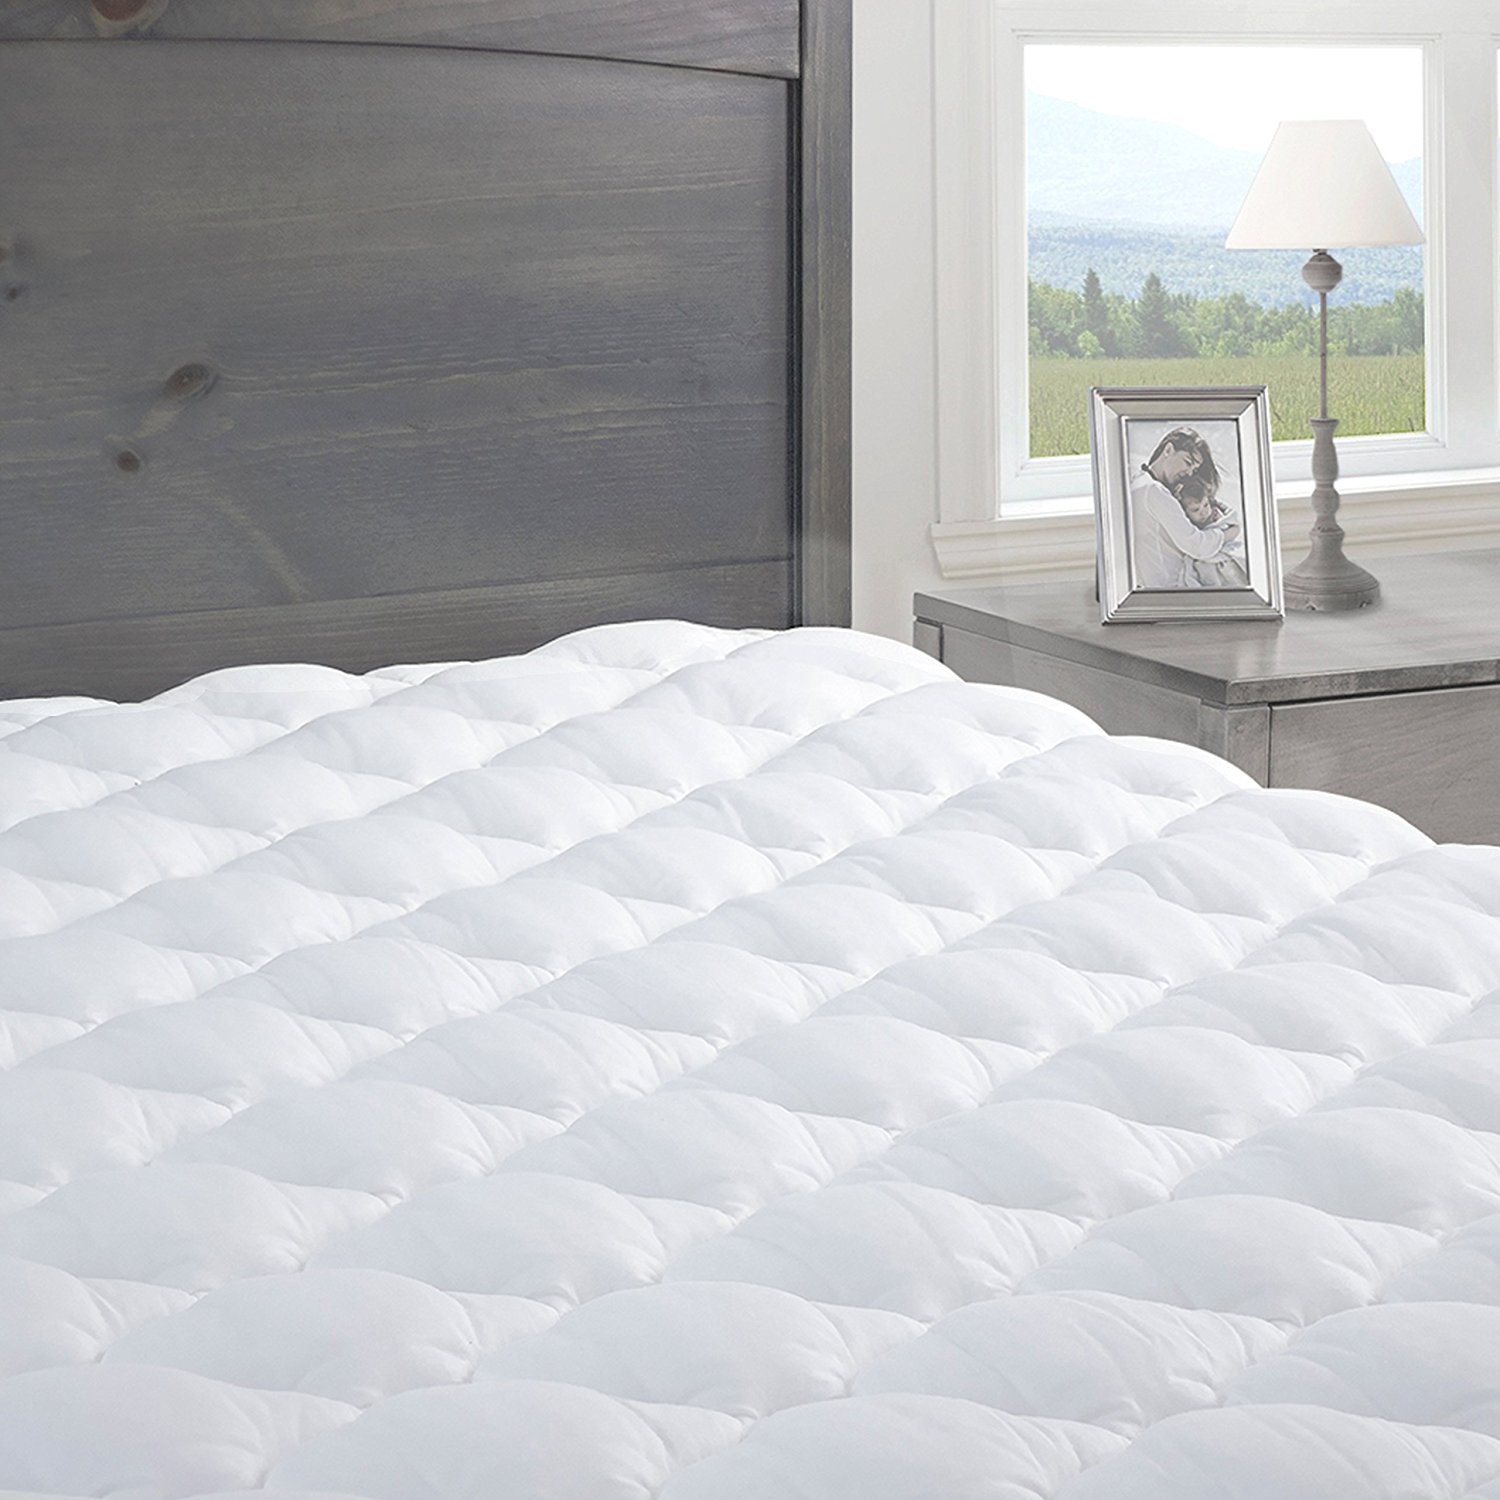 Normally $85, these mattress pads are 25 percent off today (Photo via Amazon)